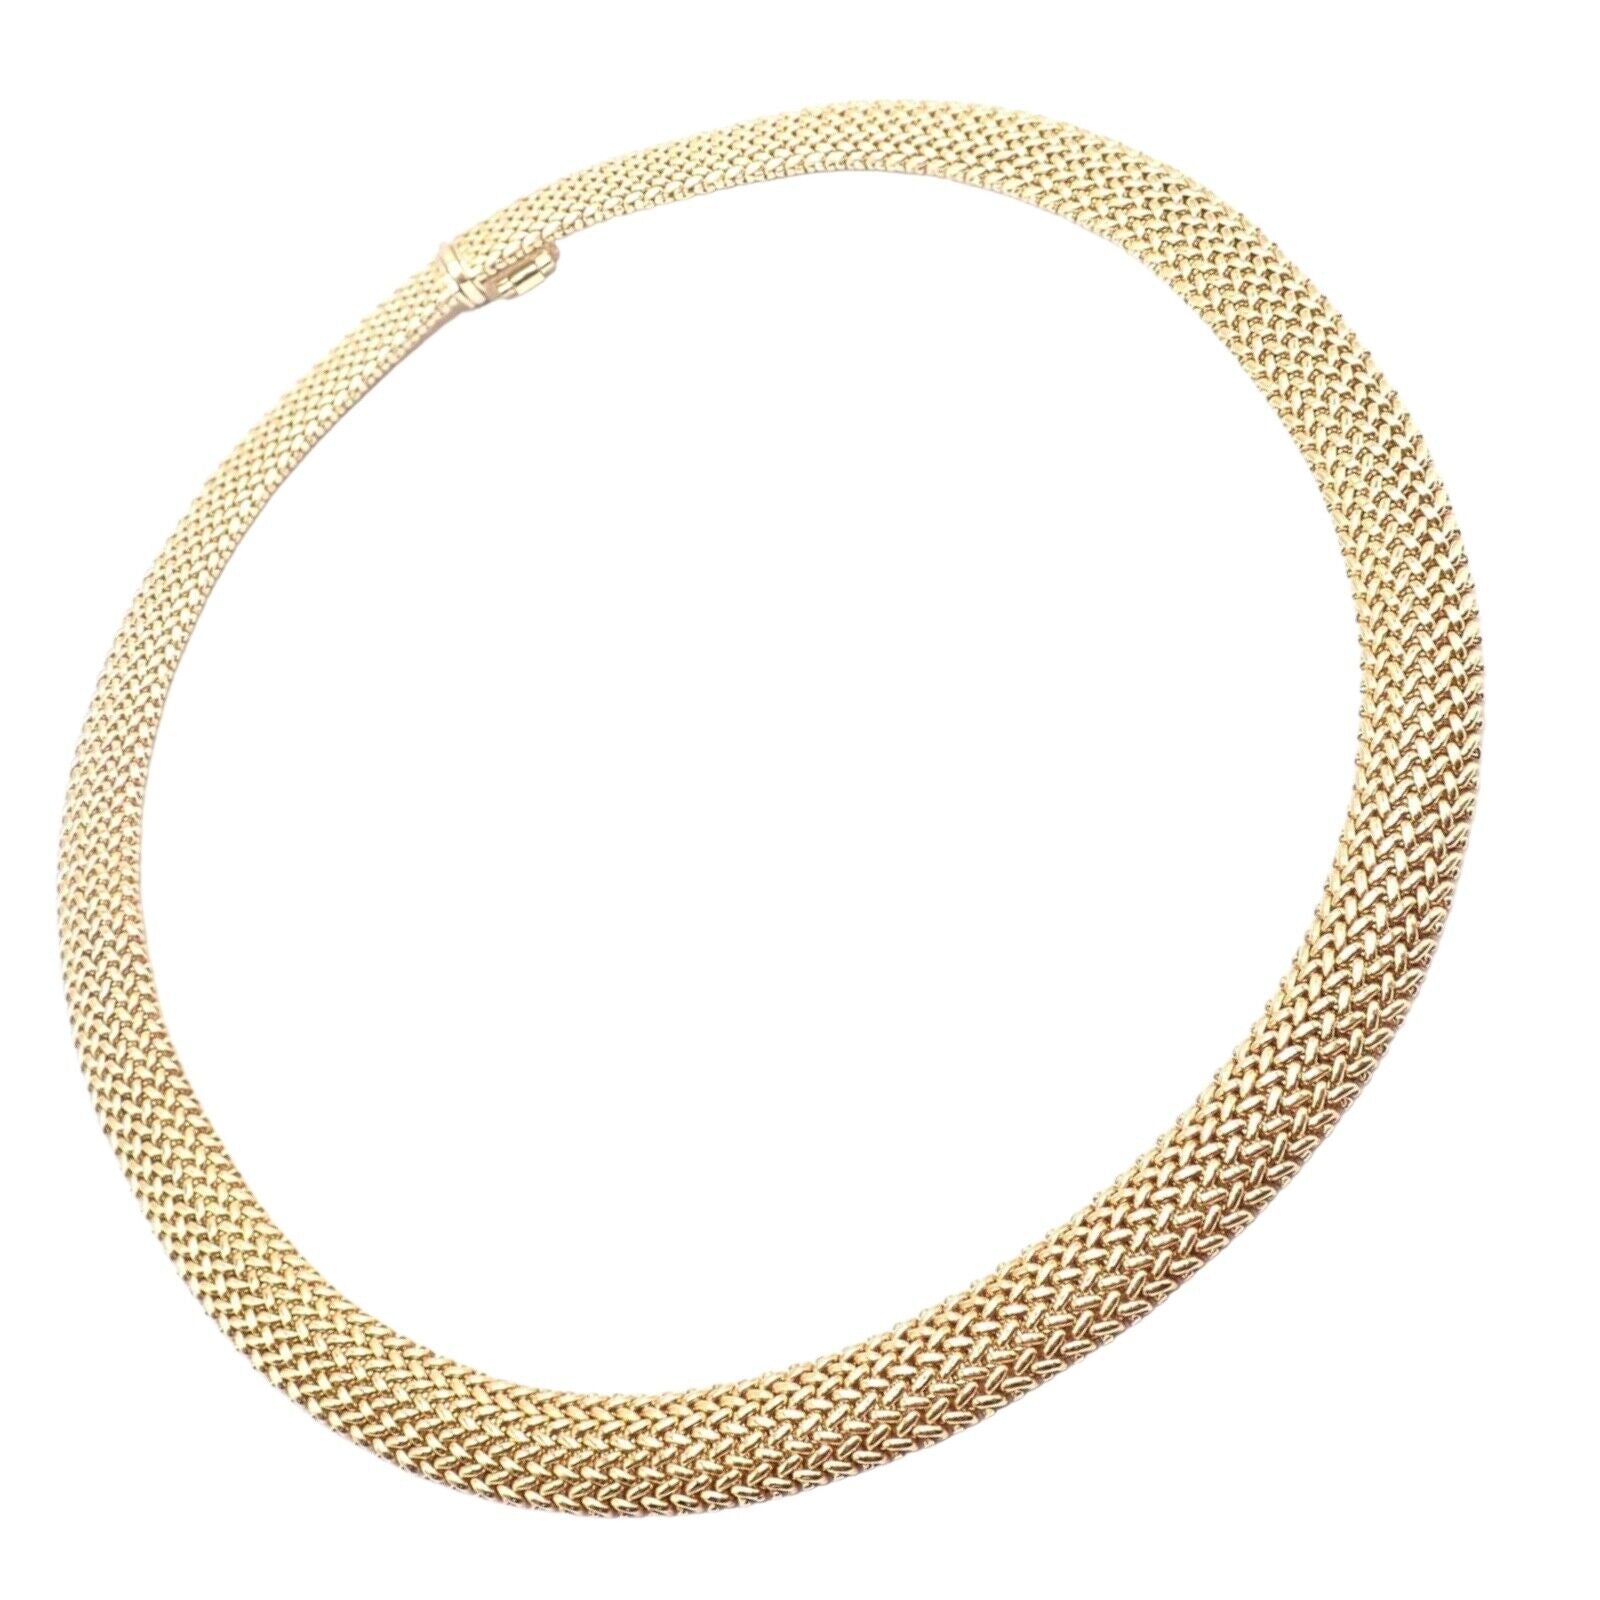 Authentic! Tiffany & Co 18k Yellow Gold Somerset Mesh Necklace | Fortrove